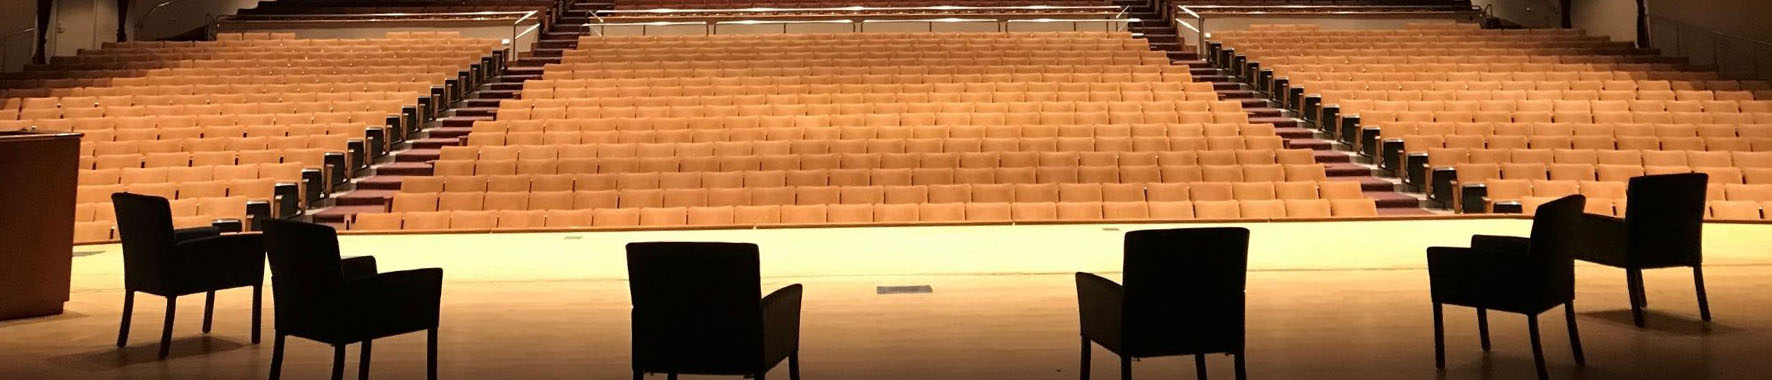 concert hall with chairs